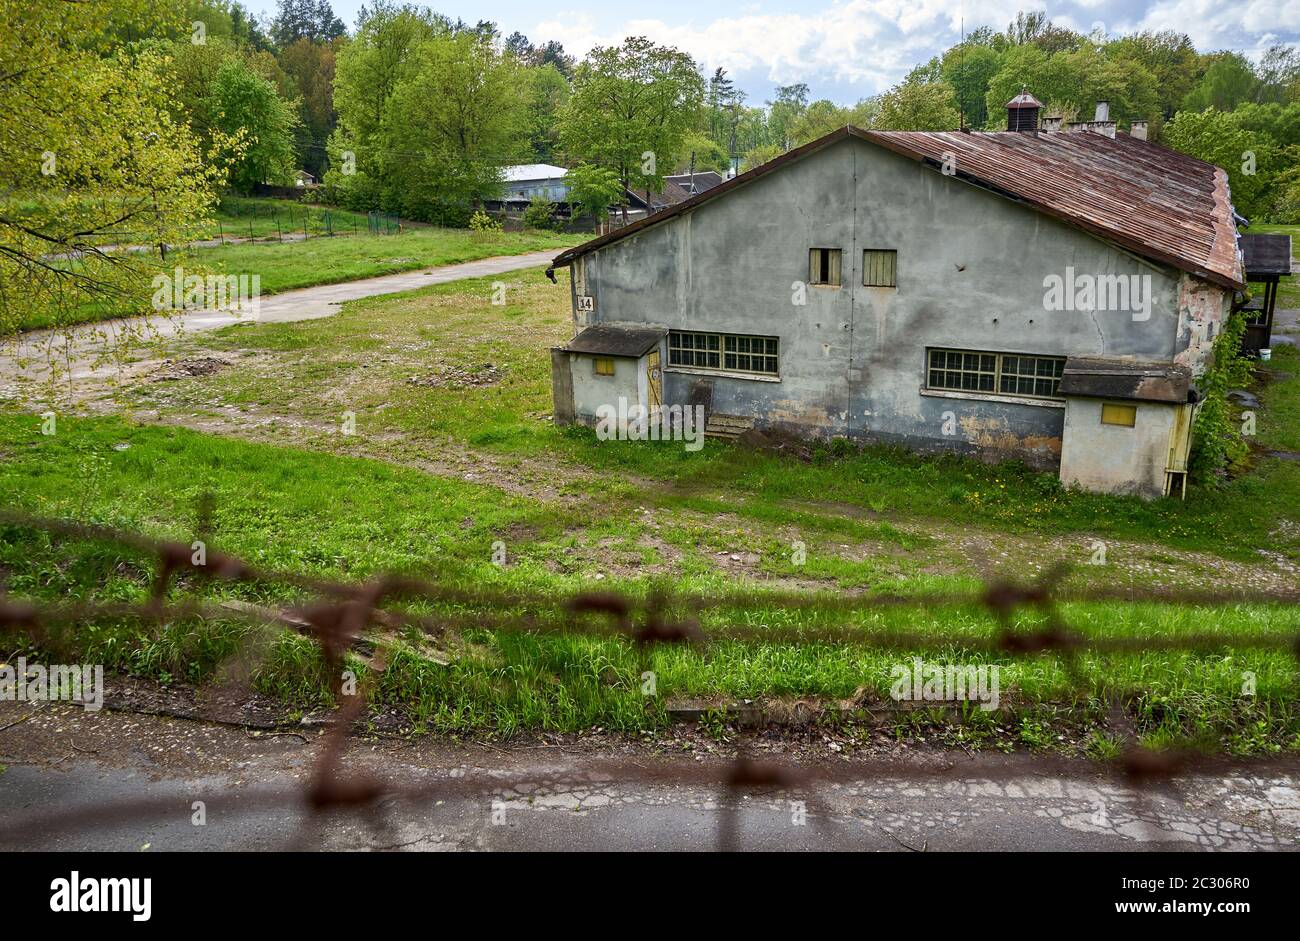 Old rural house with metal fence around it's garden Stock Photo